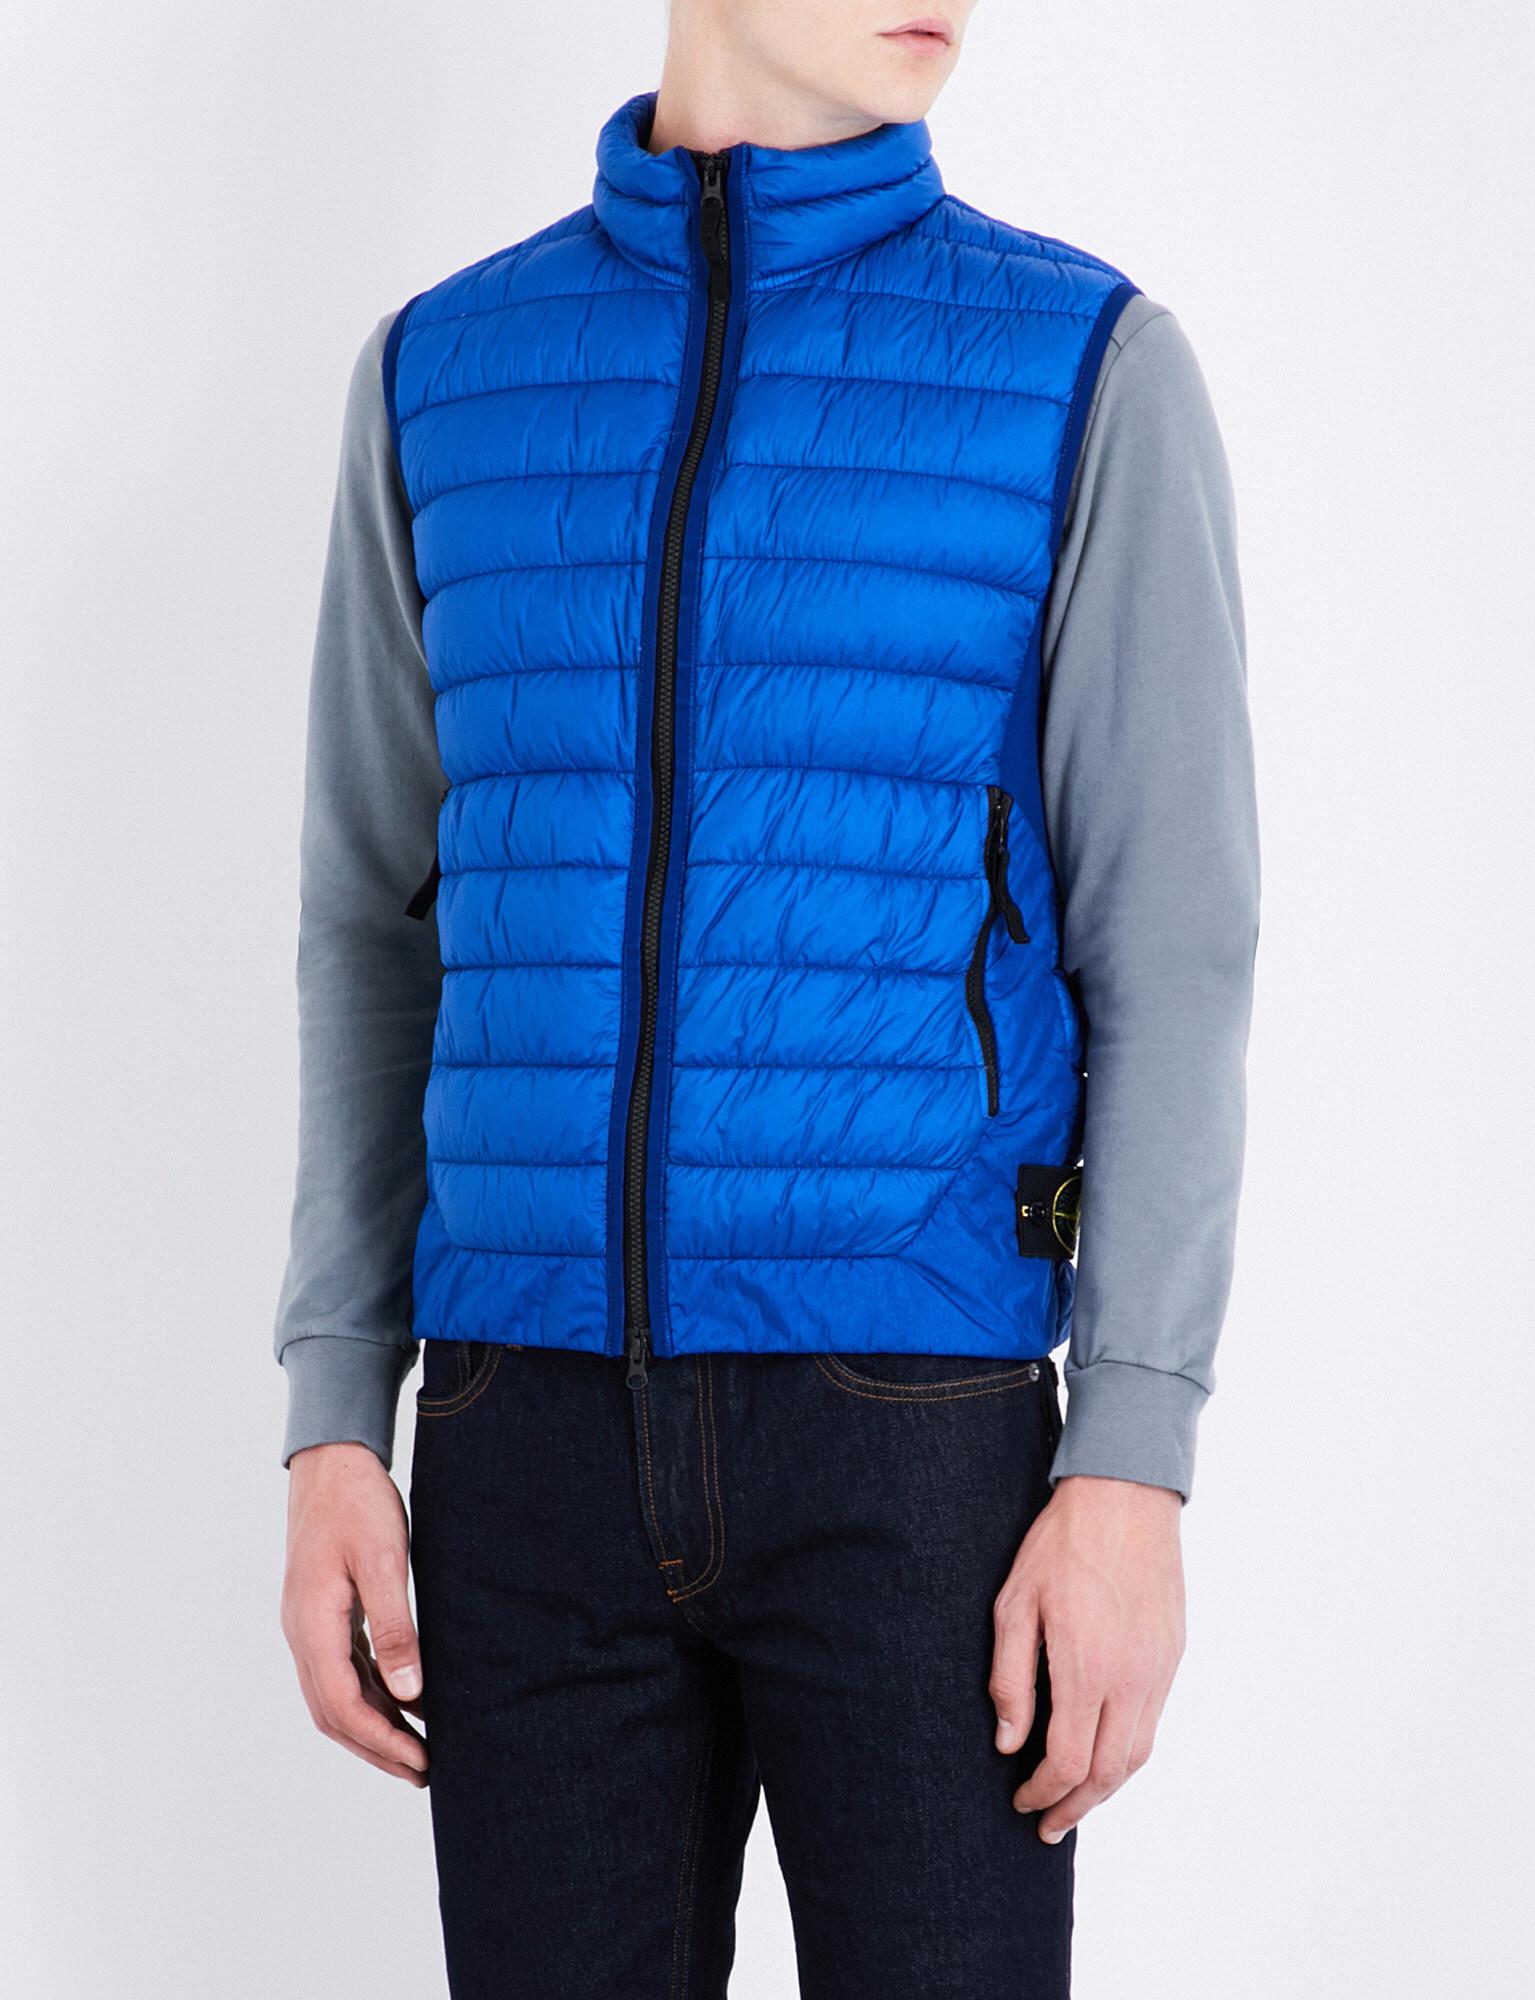 Stone Island Stand-collar Quilted Gilet in Blue for Men - Lyst